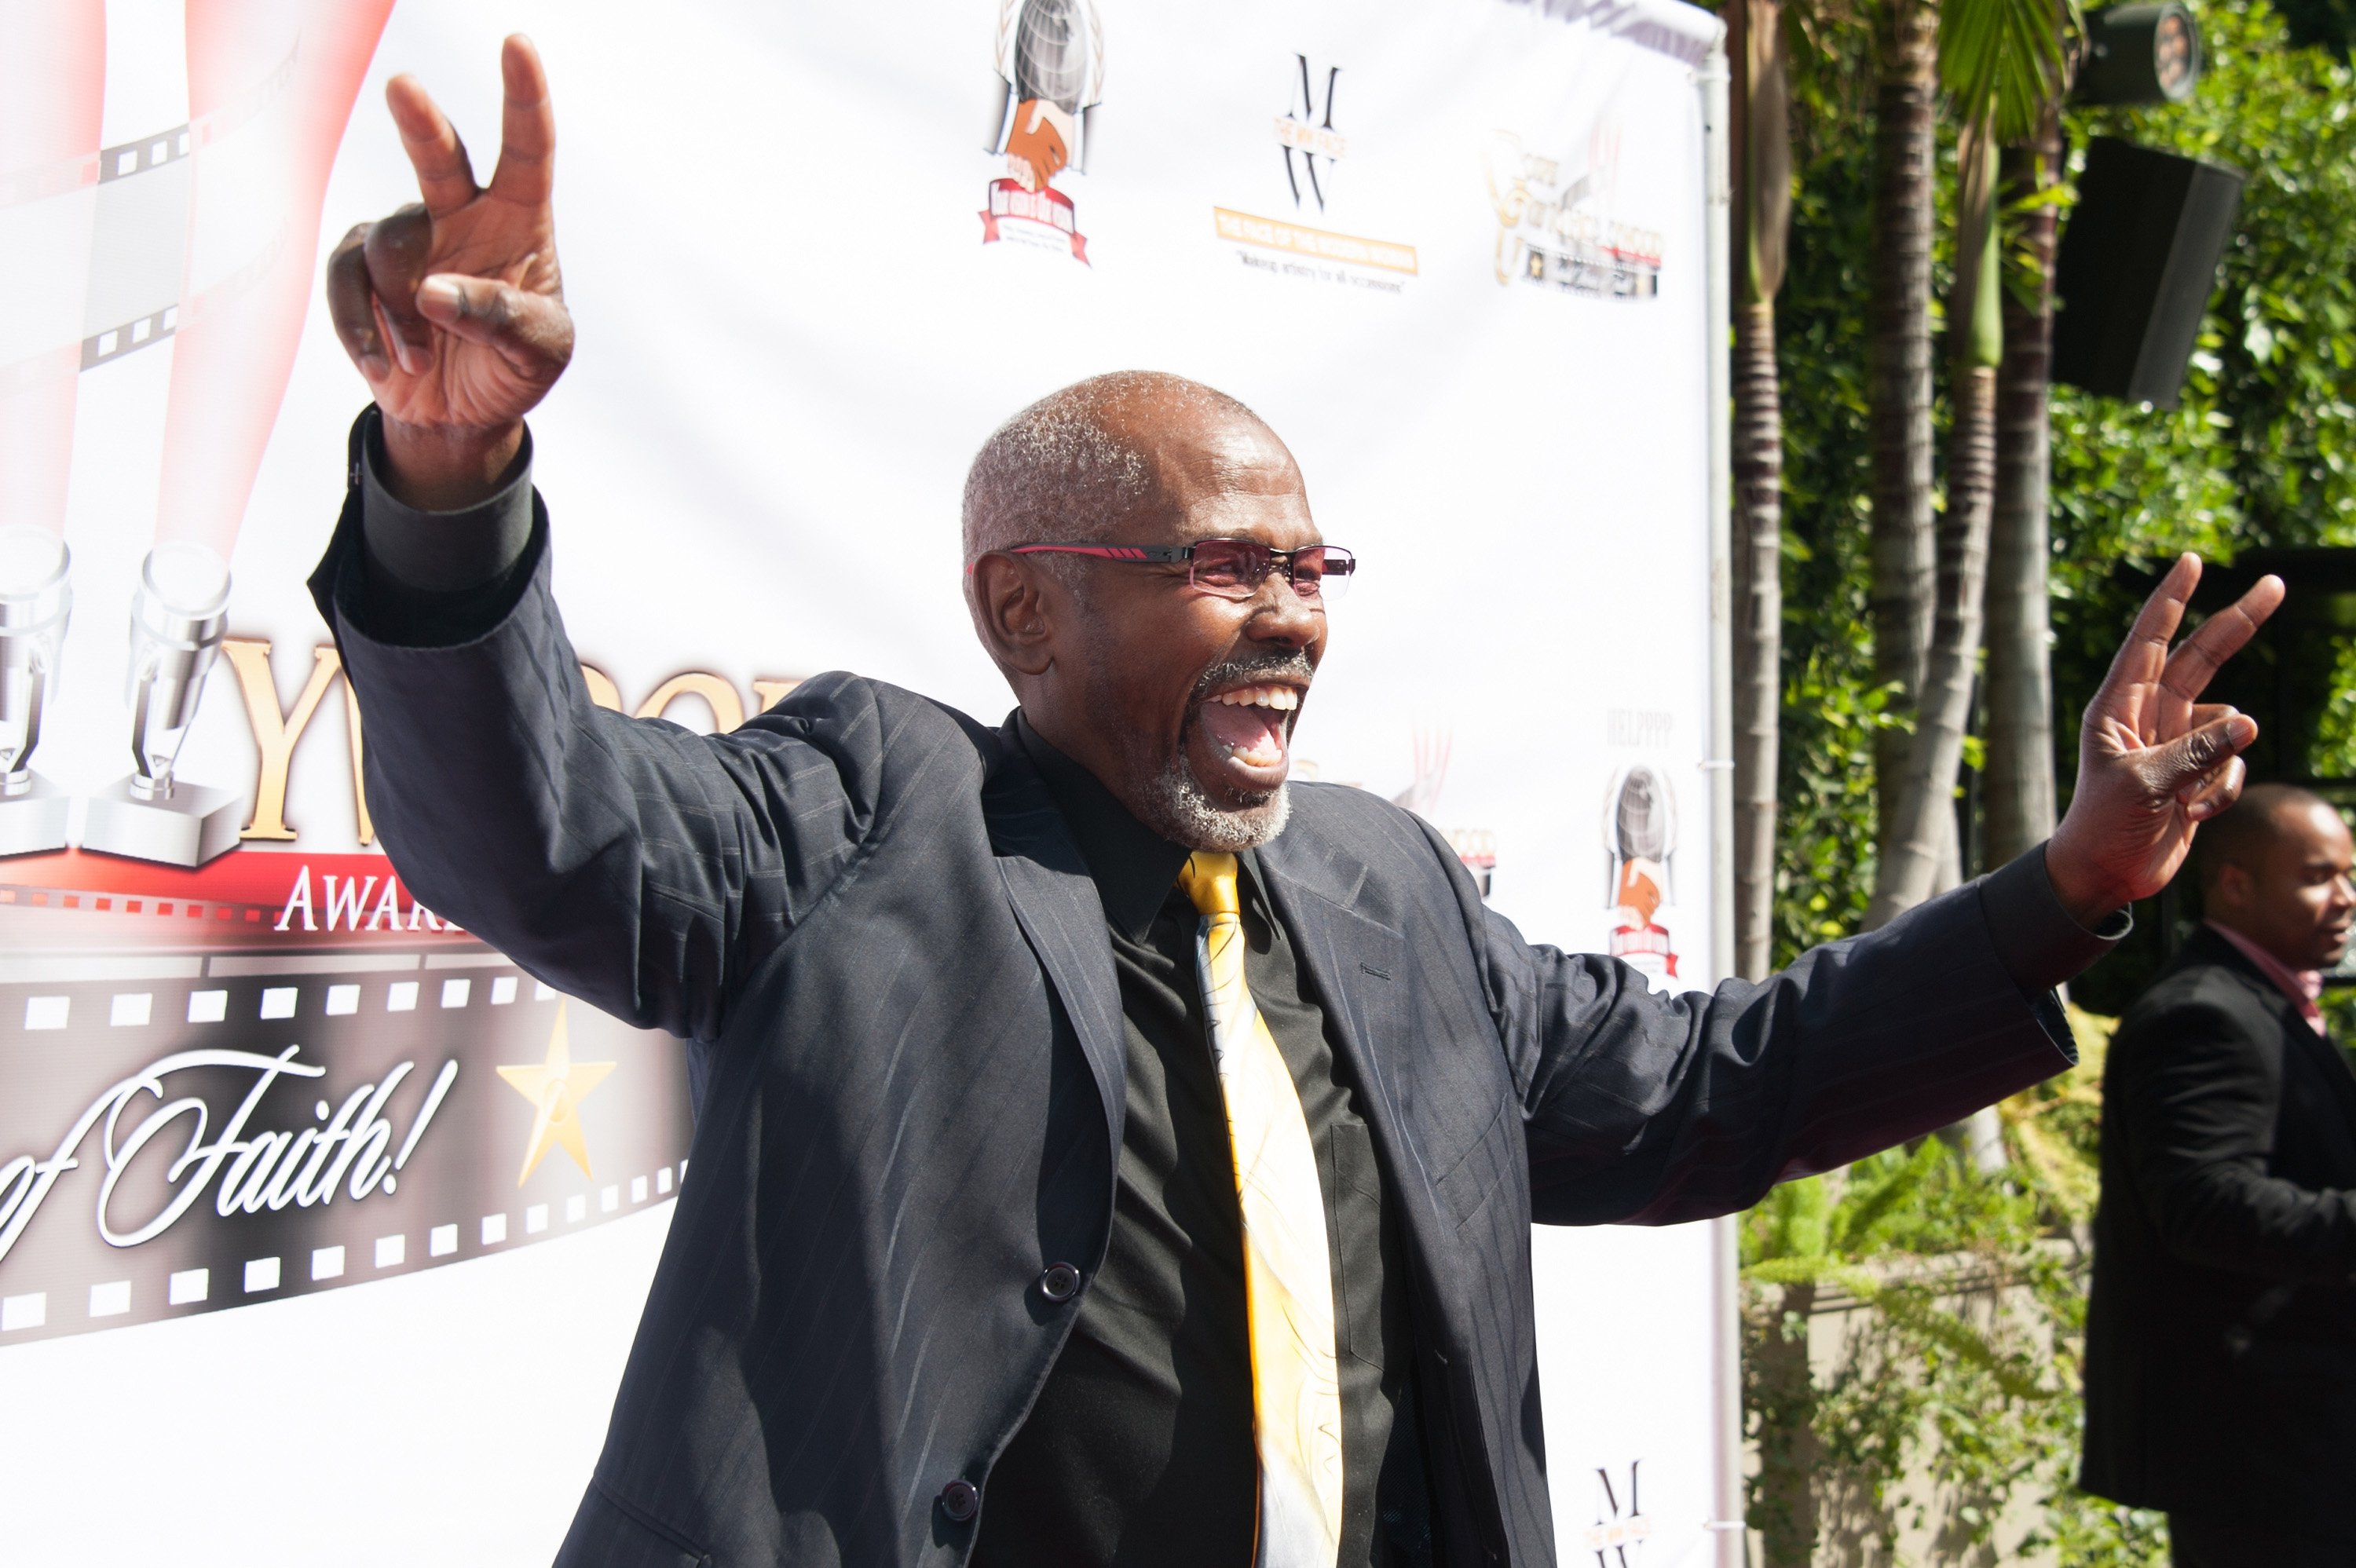 Actor Ernest Lee Thomas arrives at the Gospel Goes To Hollywood event at the Vibiana on February 26, 2016 |Photo: Getty Images